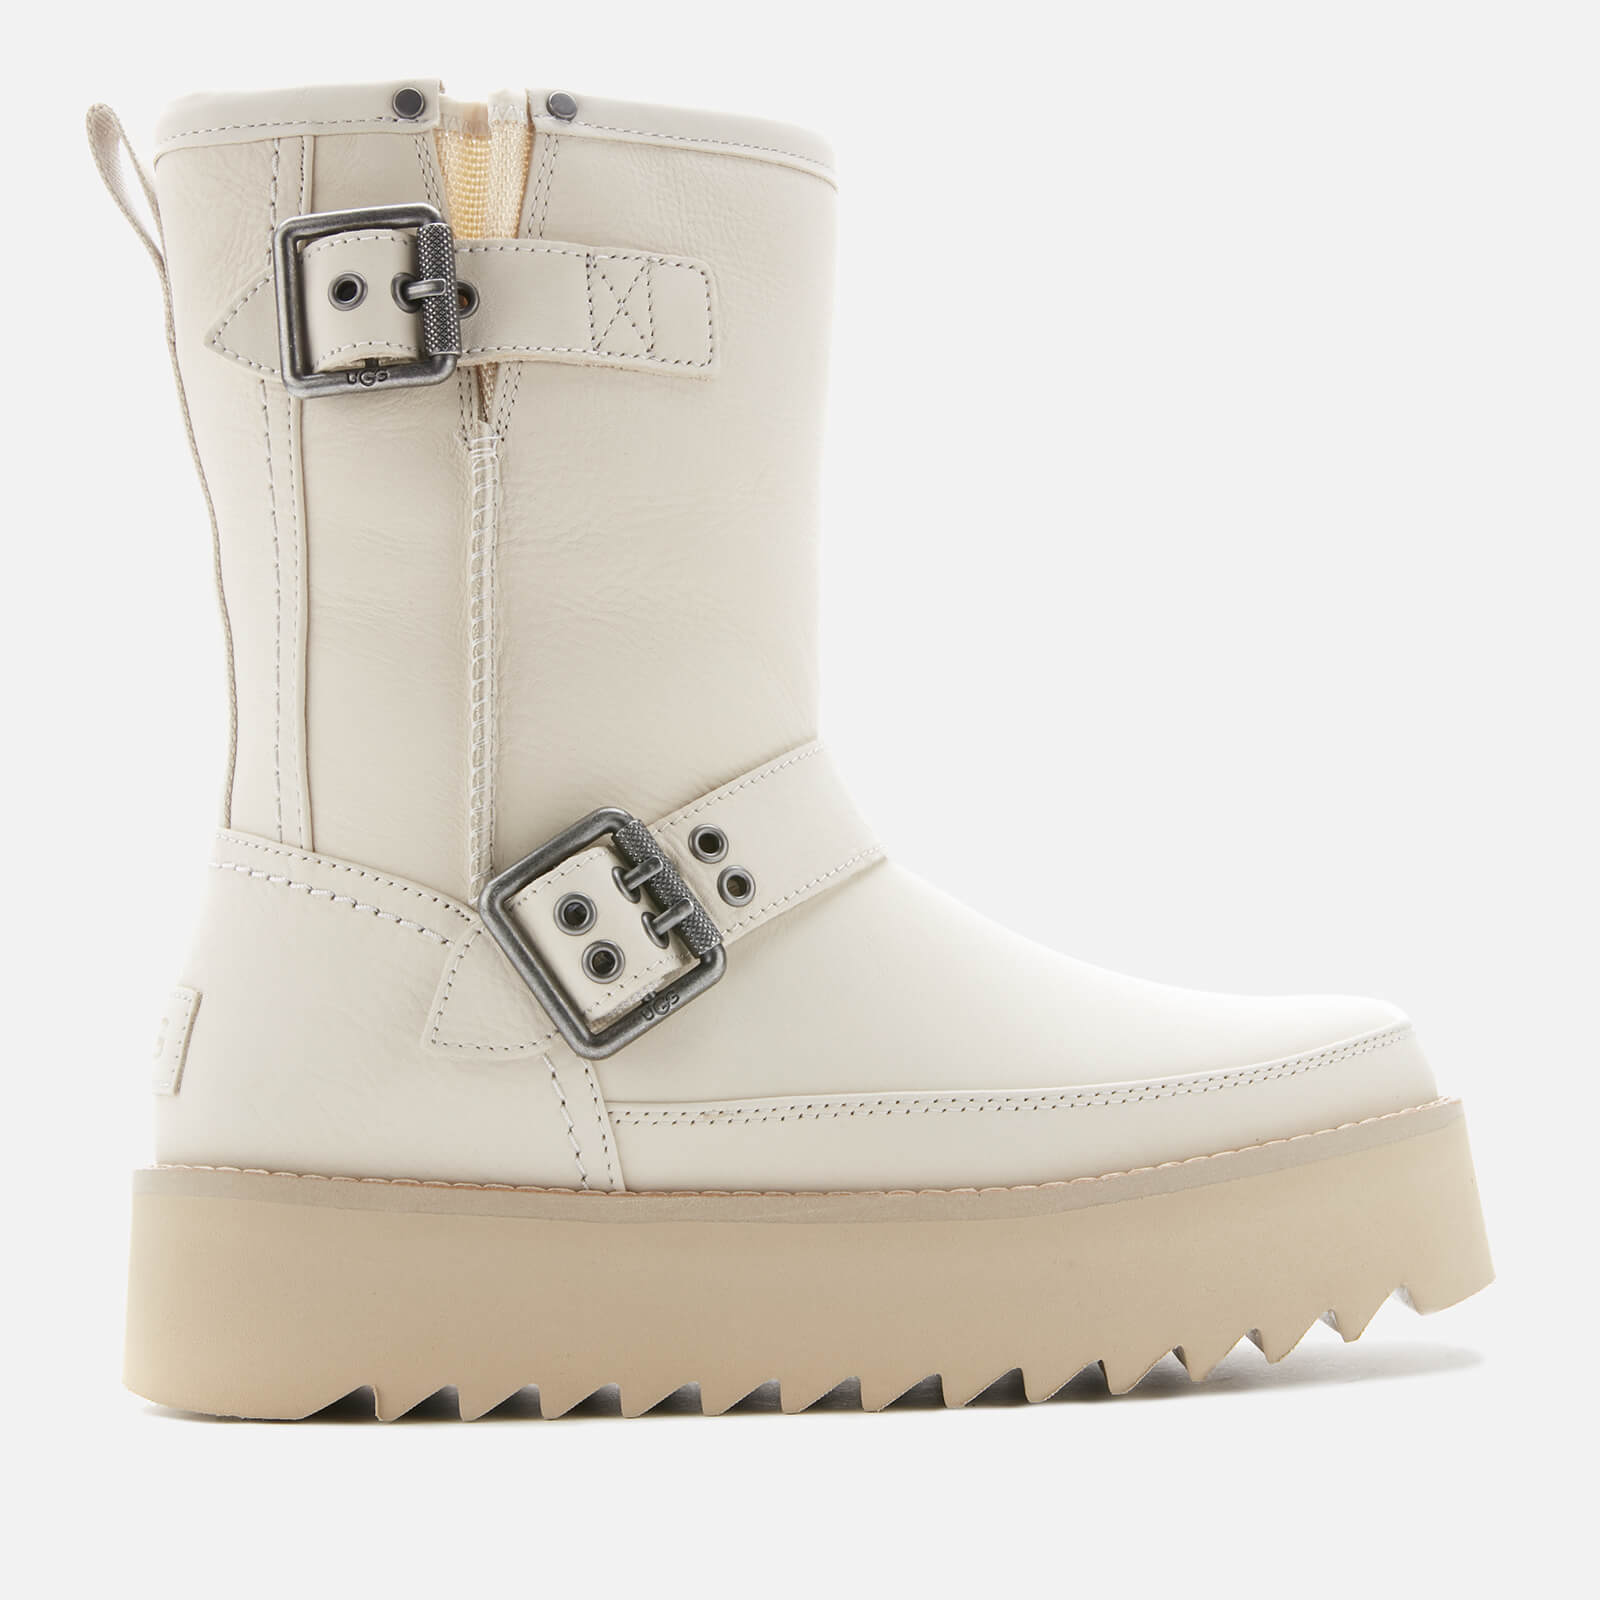 white leather ugg boots Cheaper Than 